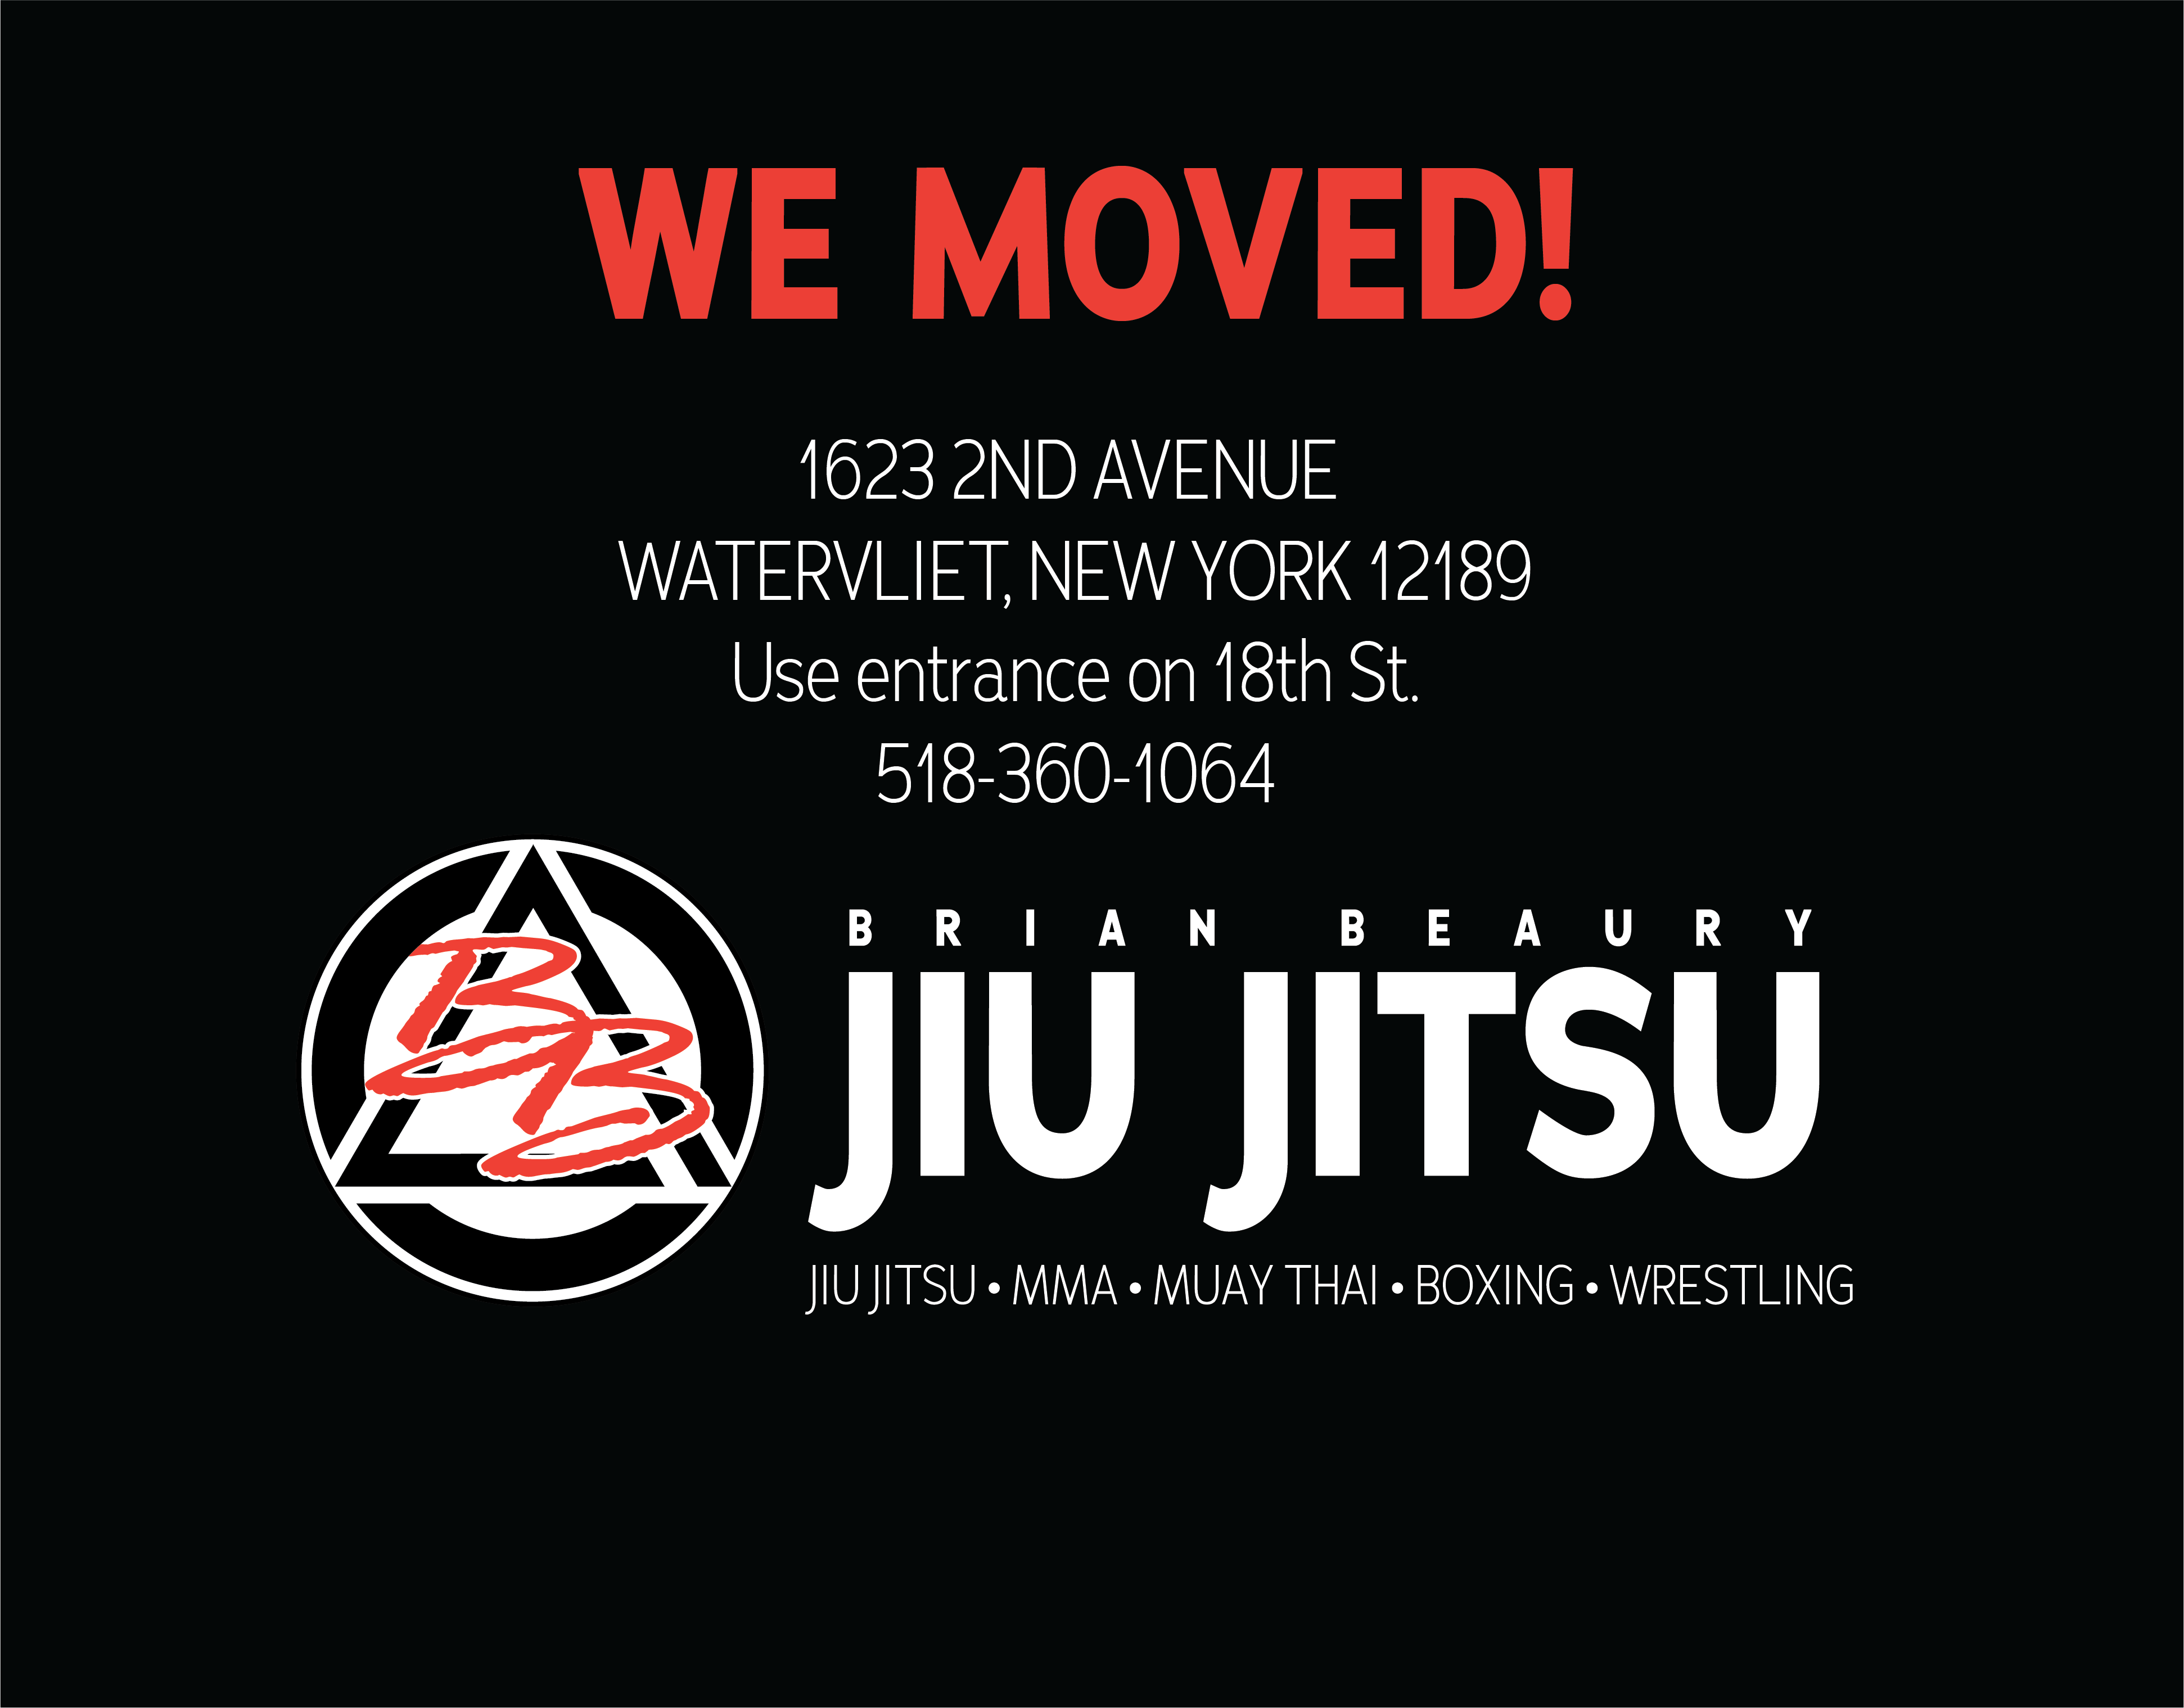 We moved! 1623 2nd Ave in Watervliet. Use 18th Street entrance. 518-360-1064.